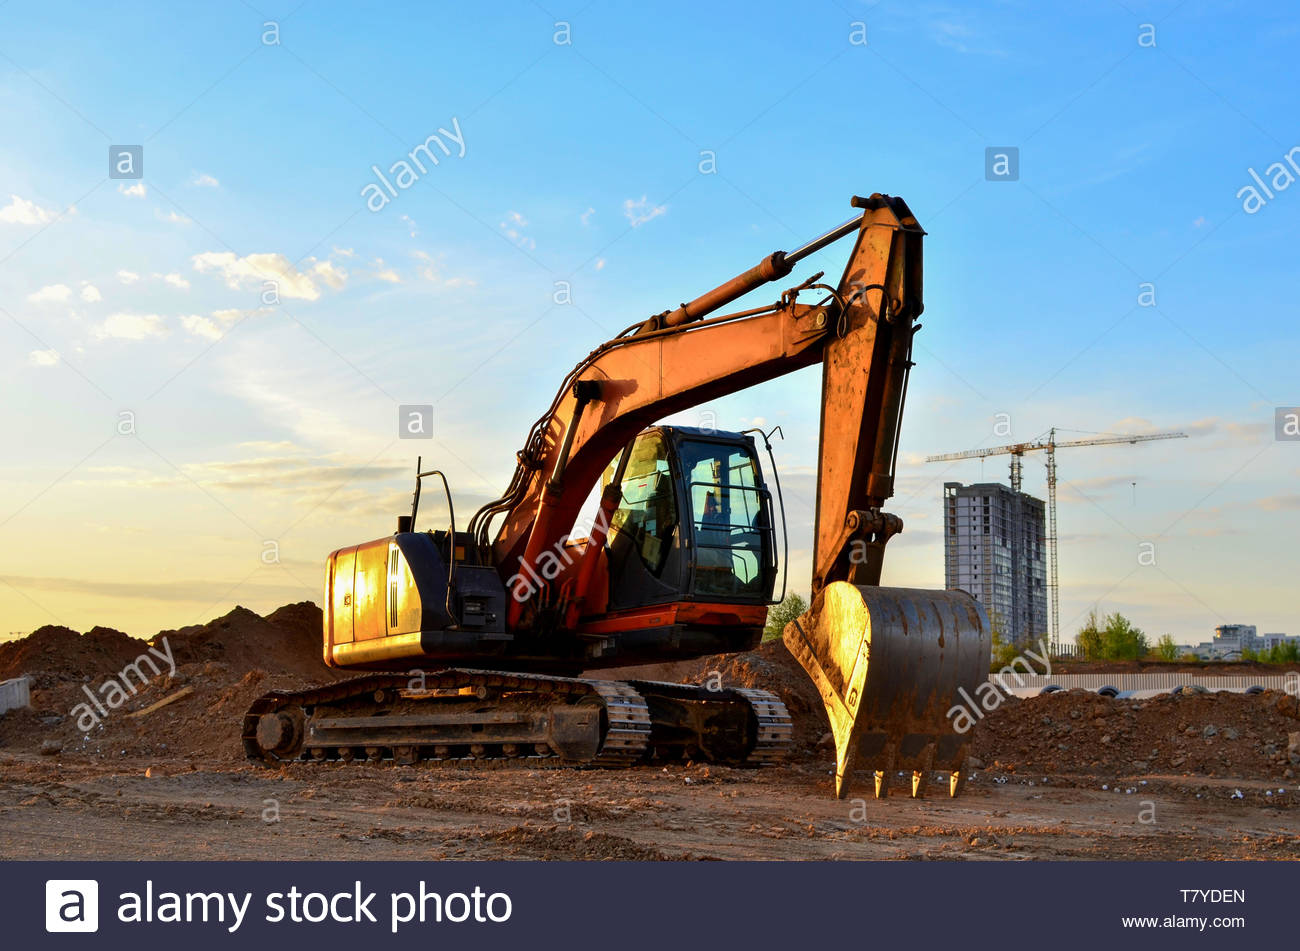 Heavy Tracked Excavator At A Construction Site On Background Of